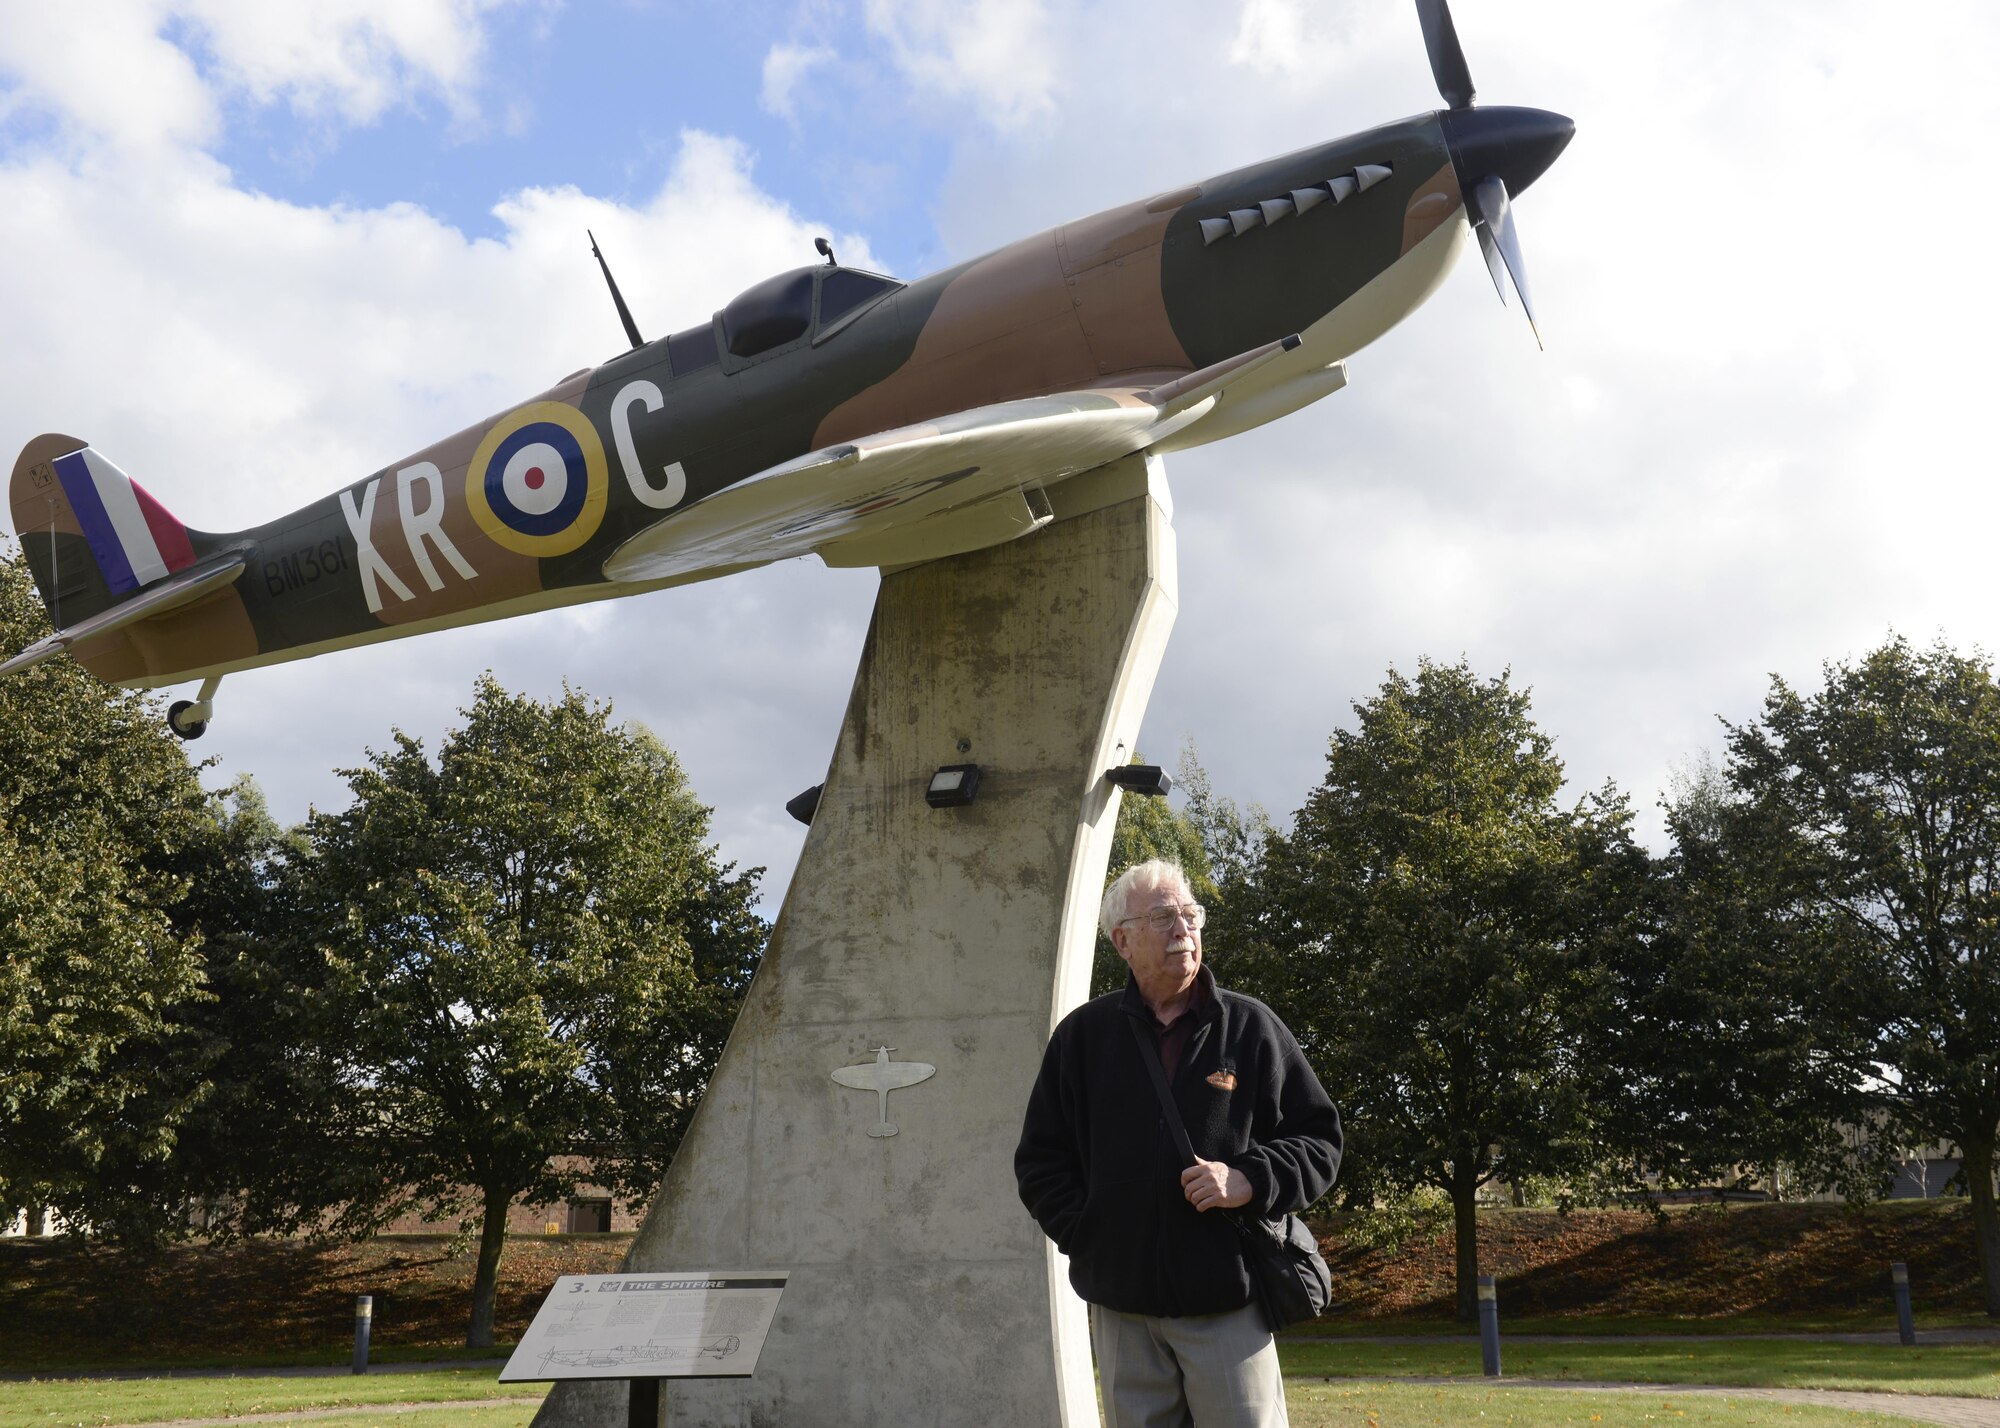 Michael Peterson, son of former base commander Maj. Gen. Chesley G. Peterson, stands in front of a replica of his father’s Supermarine Spitfire at Royal Air Force Lakenheath, England, Oct. 5. Michael brought an old friend who knew his father to see the replica and other memorabilia at the Liberty Wing. (U.S. Air Force photo/Airman 1st Class Abby L. Finkel) 